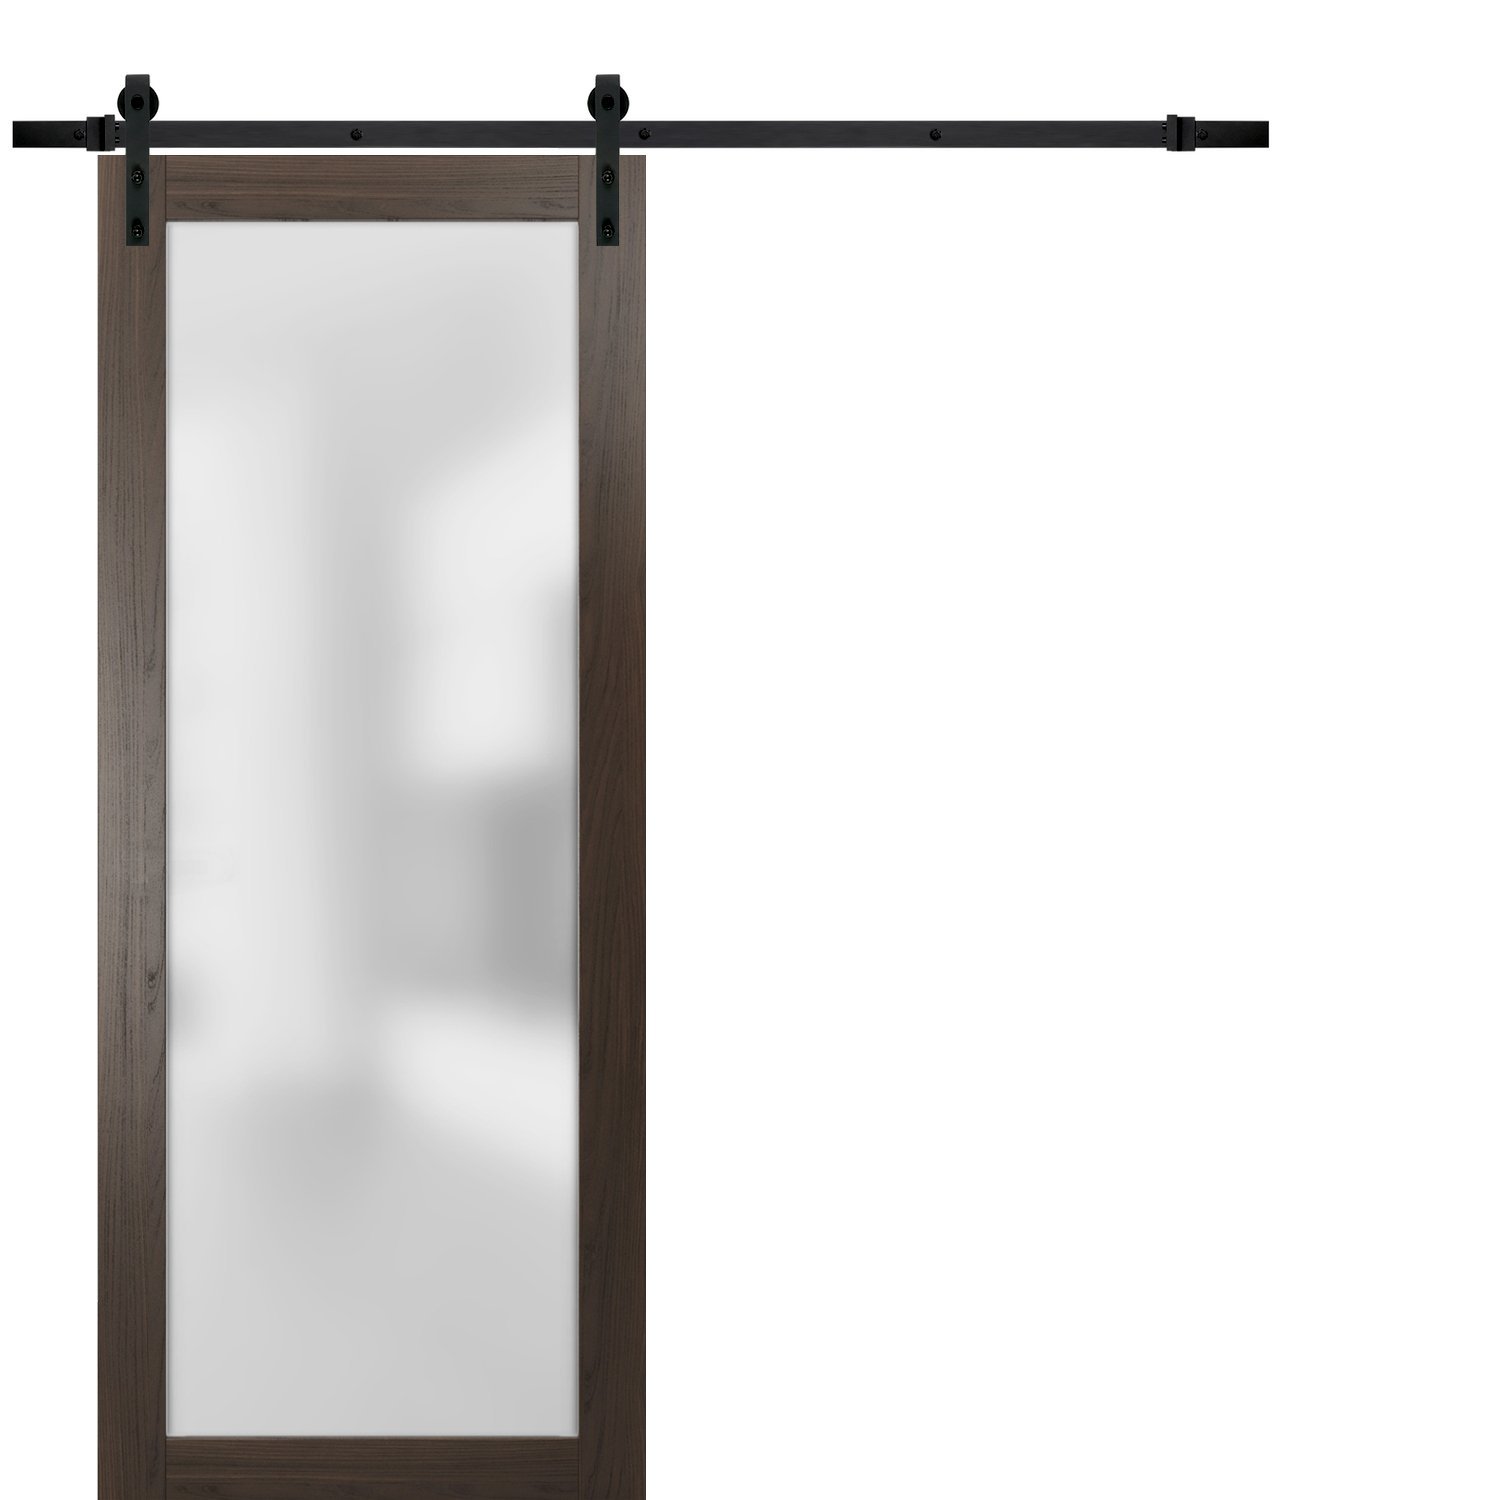 Sturdy Barn Door Frosted Tempered Glass | Planum 2102 Chocolate Ash | 6.6FT Black Rail Hangers Heavy Hardware Set | Modern Solid Panel Interior Doors-36